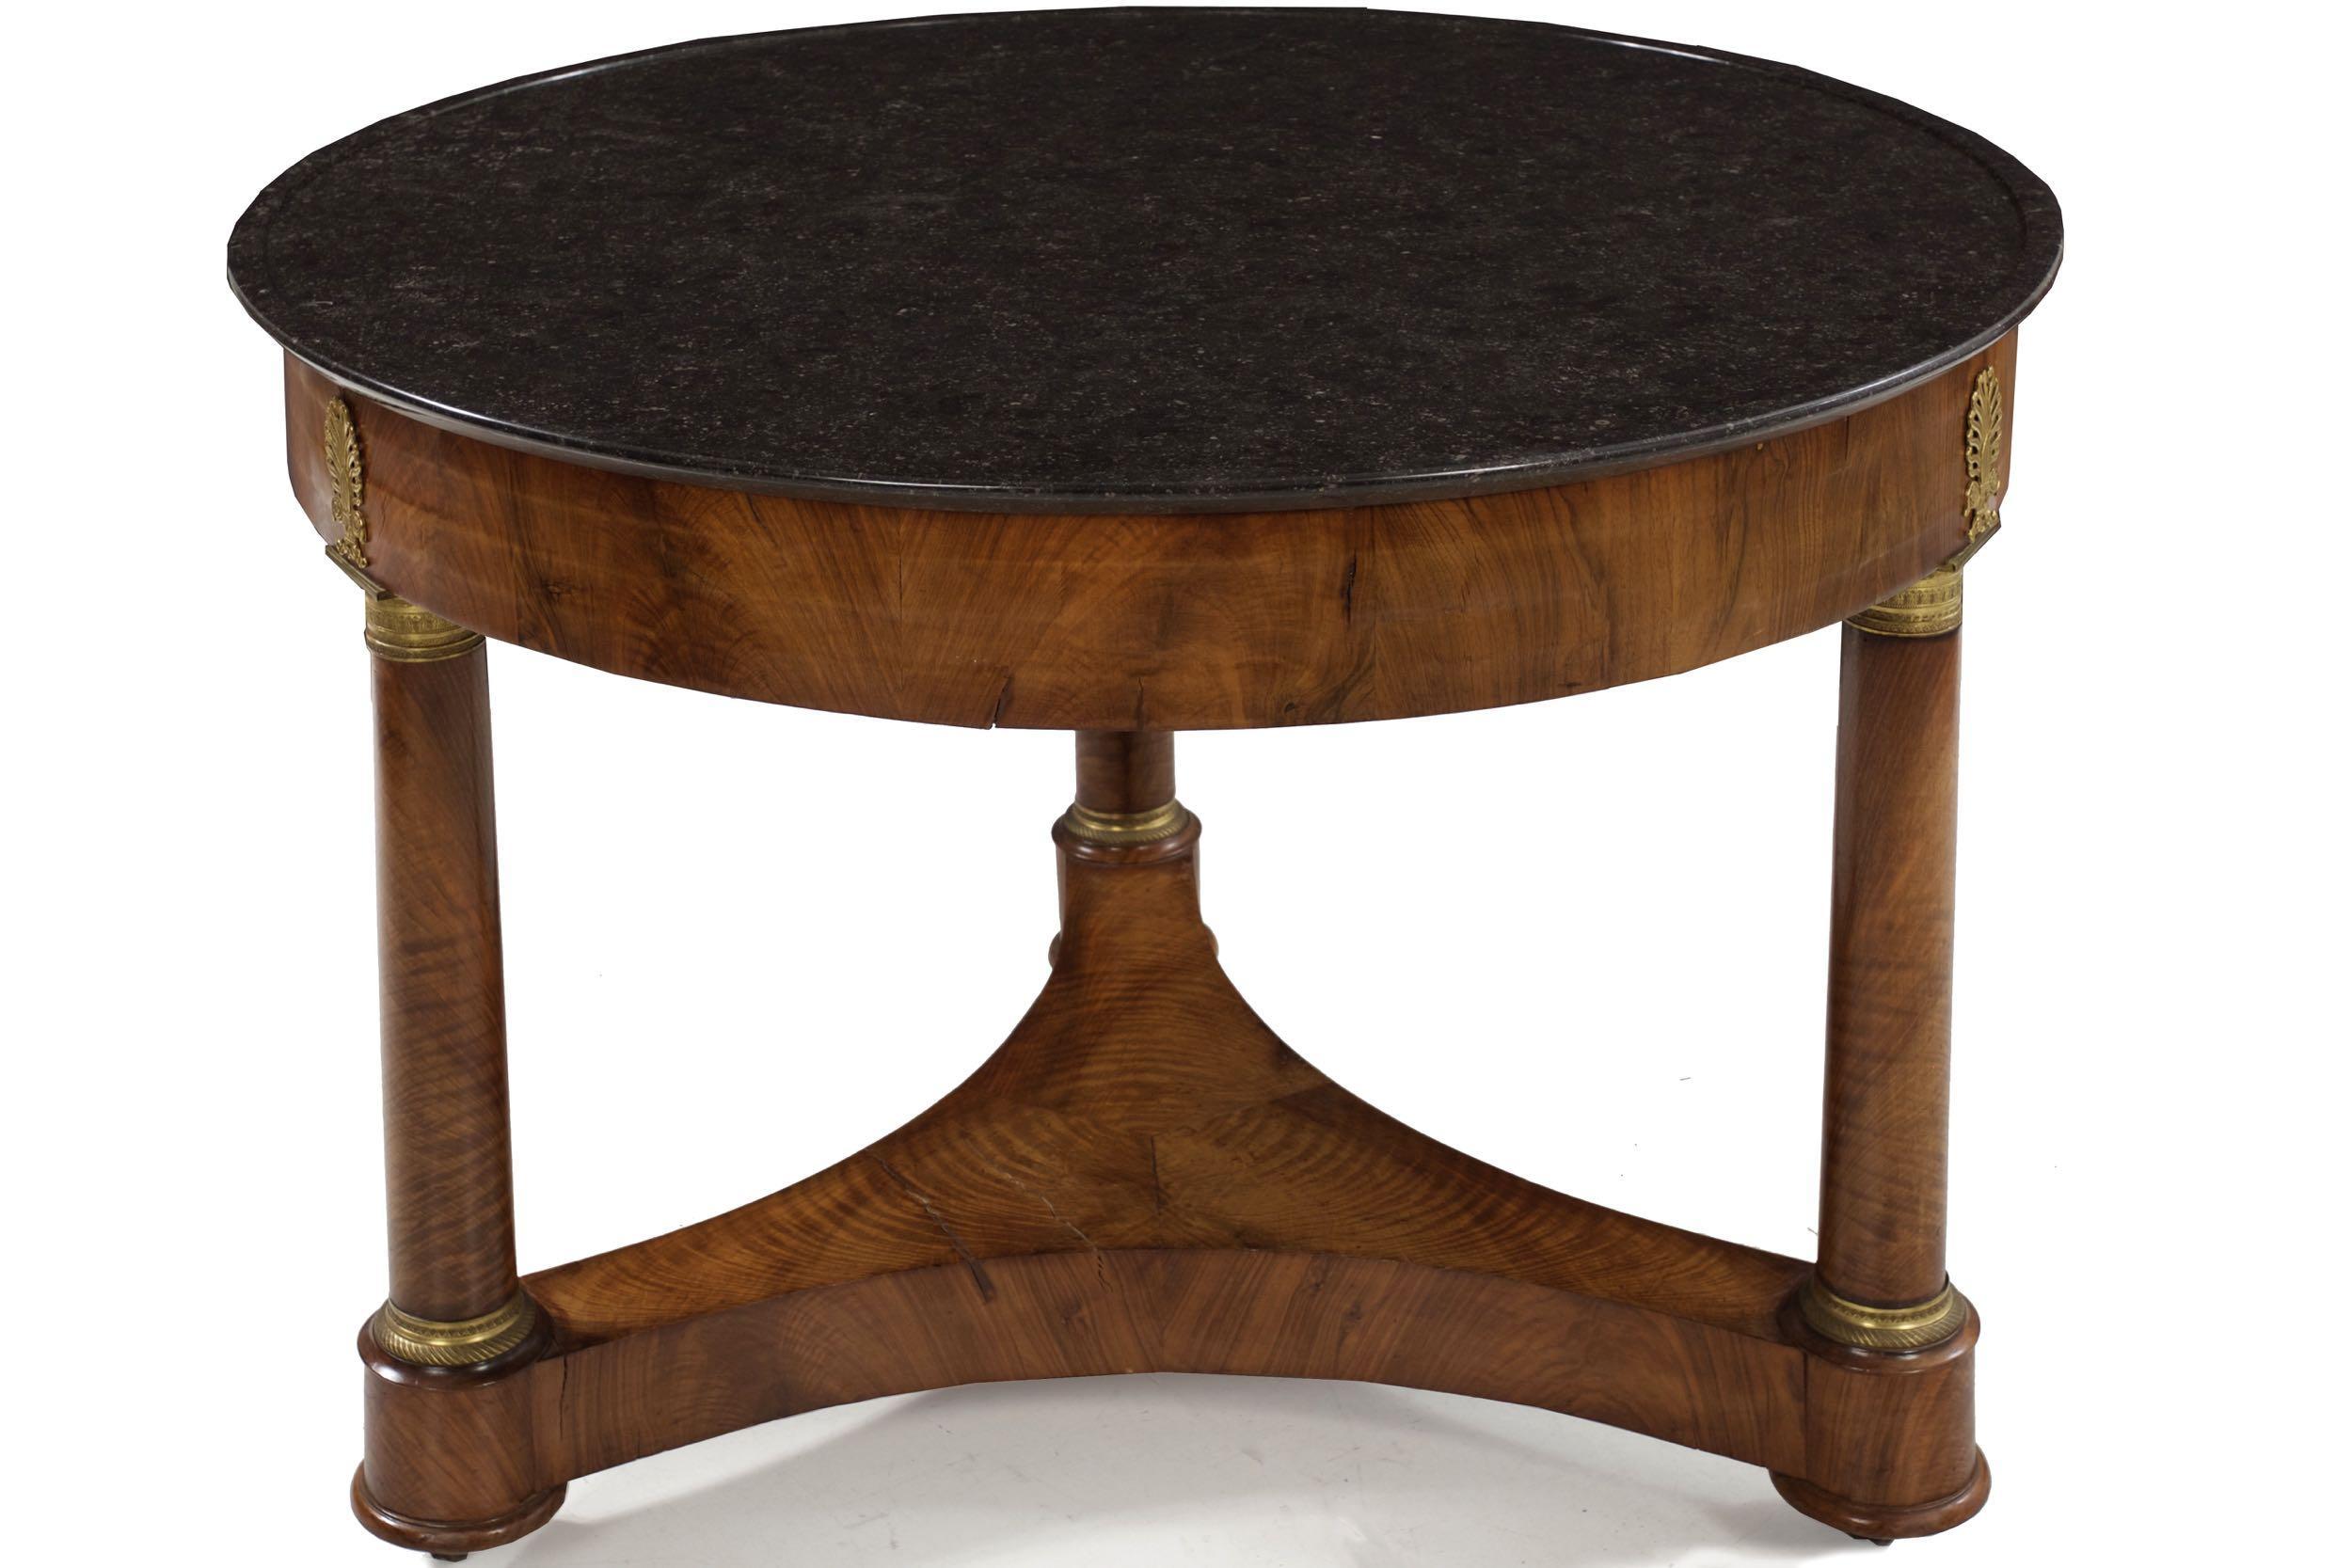 Brass French Empire Antique Burl Walnut Center Table with Black Marble Top, circa 1815 For Sale